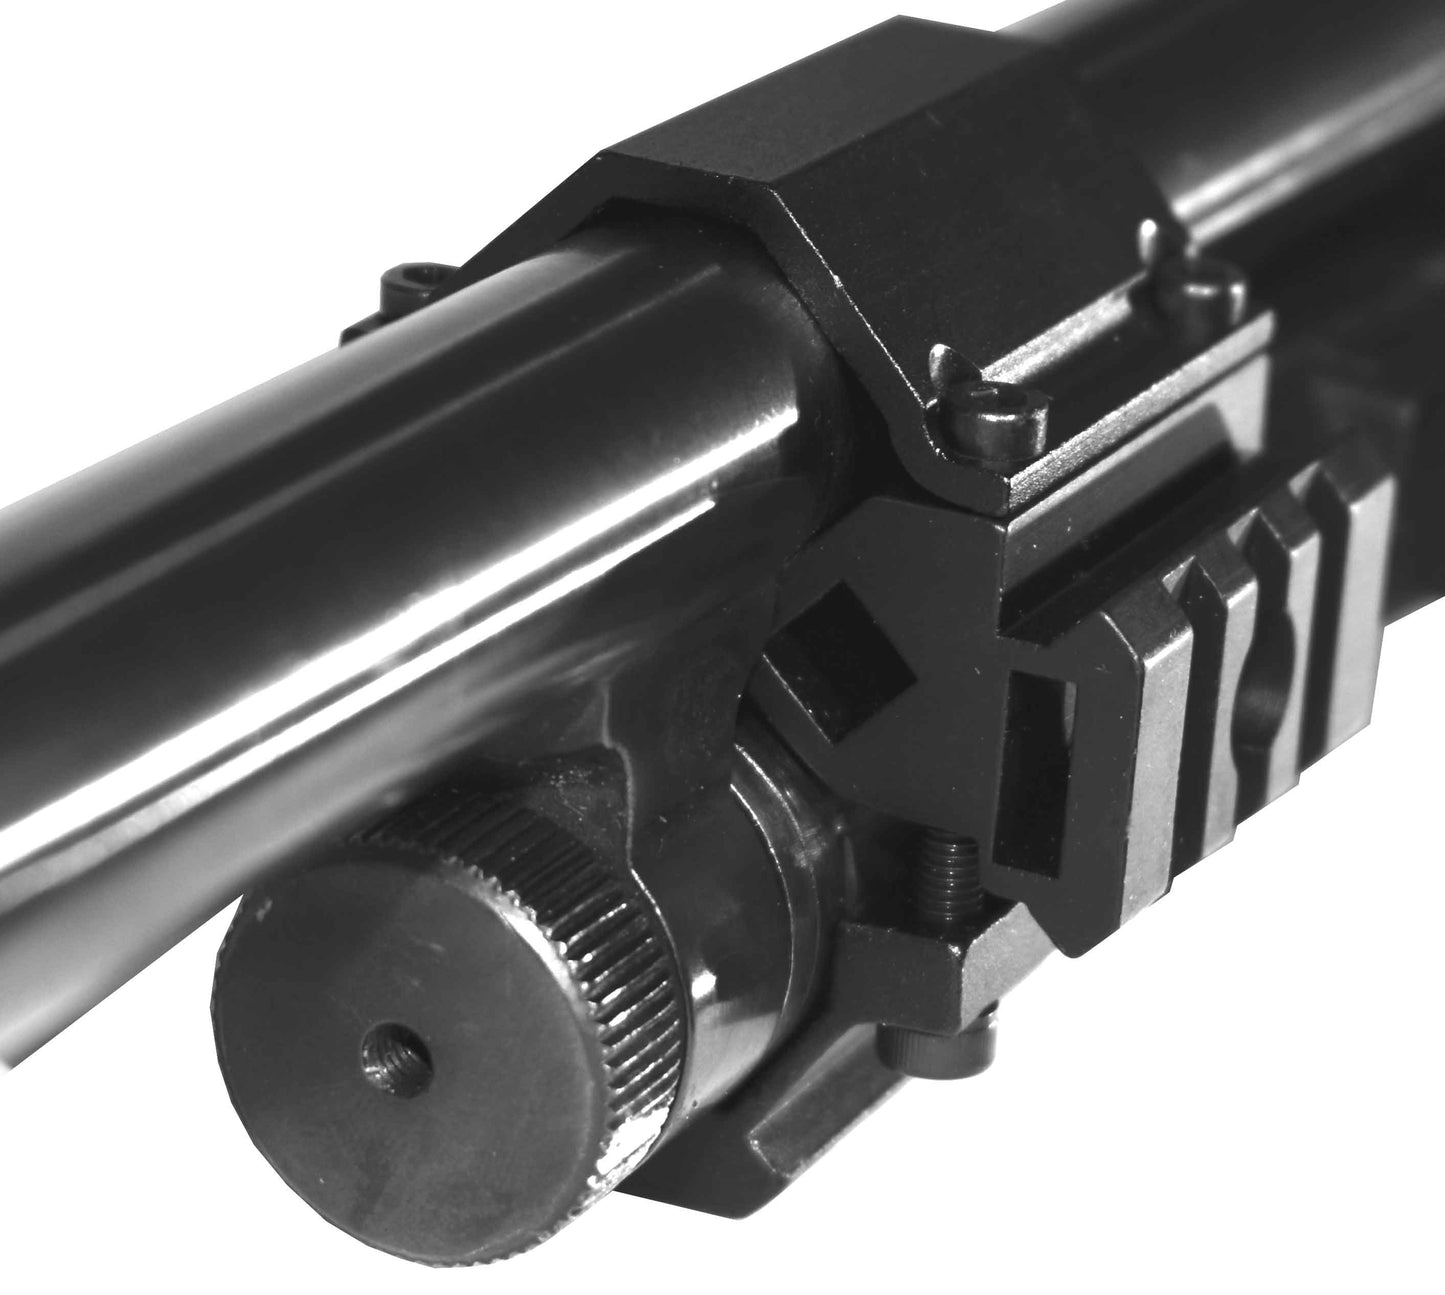 Tactical Magazine Tube Mount Compatible With Mossberg 500 12 Gauge Pumps.